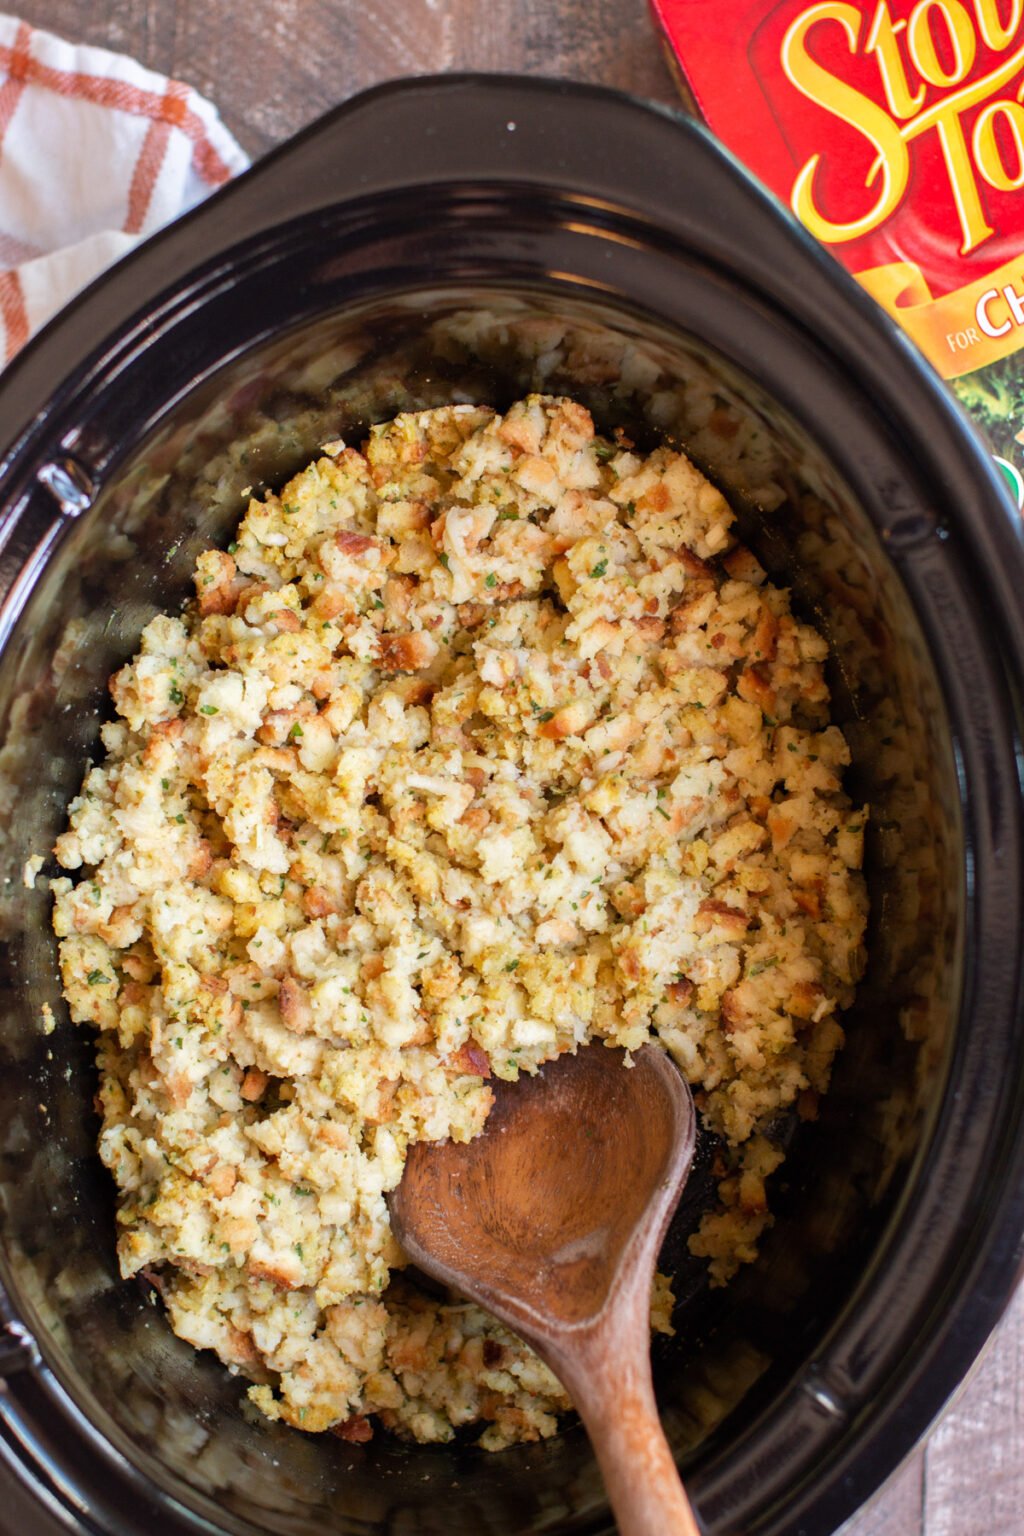 How to make Stove-Top Stuffing in the Slow Cooker - The Magical Slow Cooker